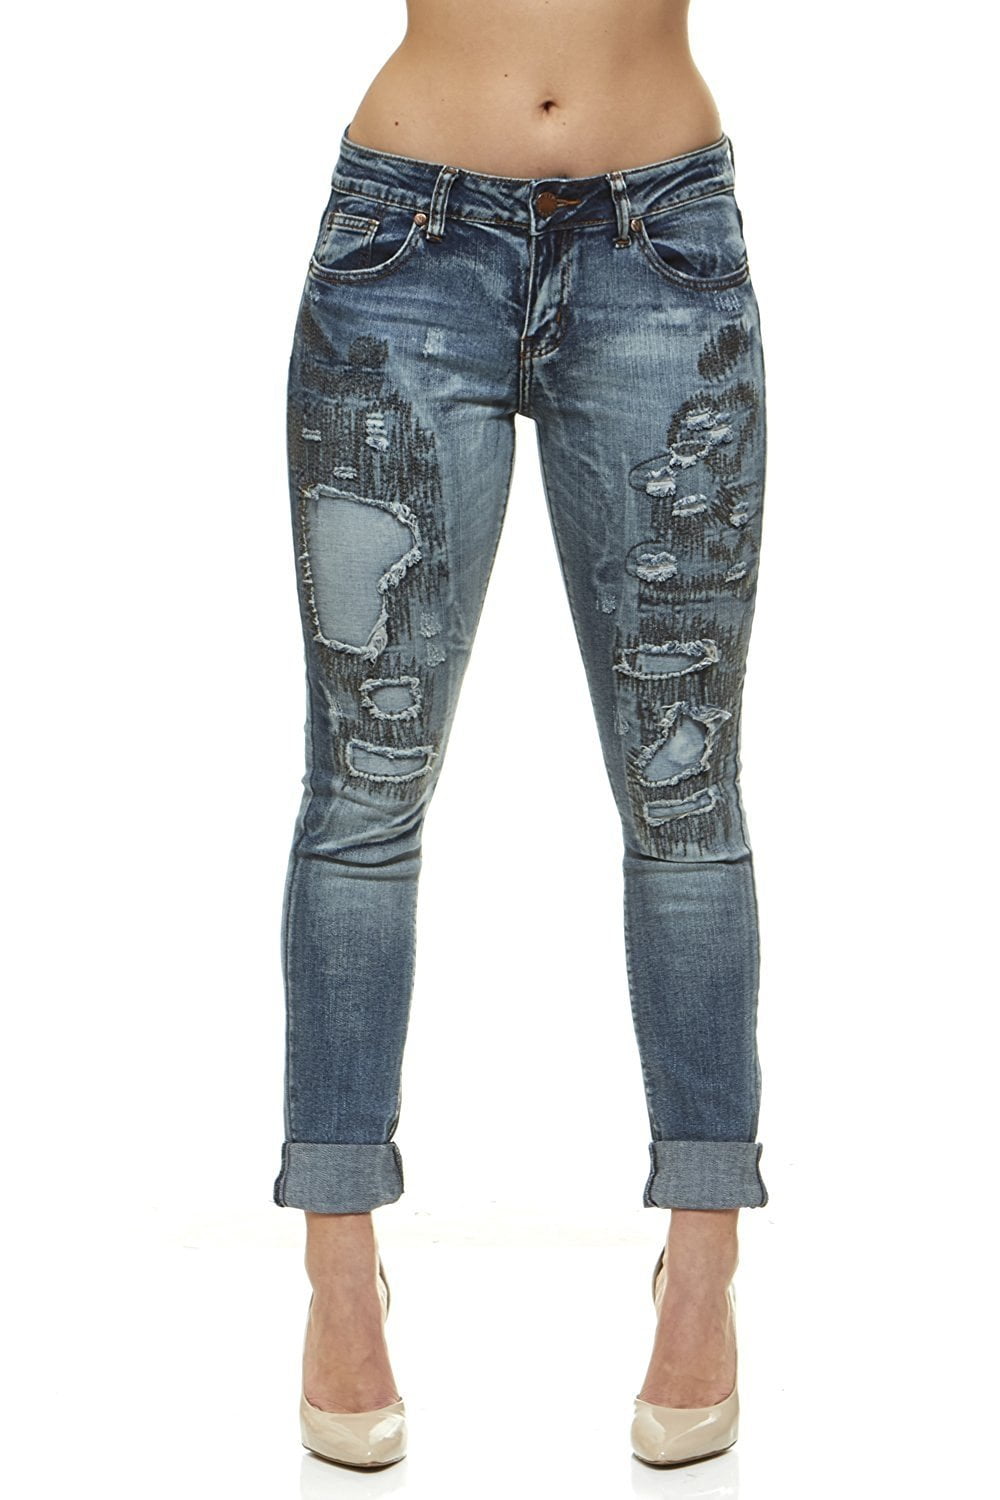 New Ladies Women Extreme Distressed Knee Ripped Boyfriend Jeans Relax Fit 6-14